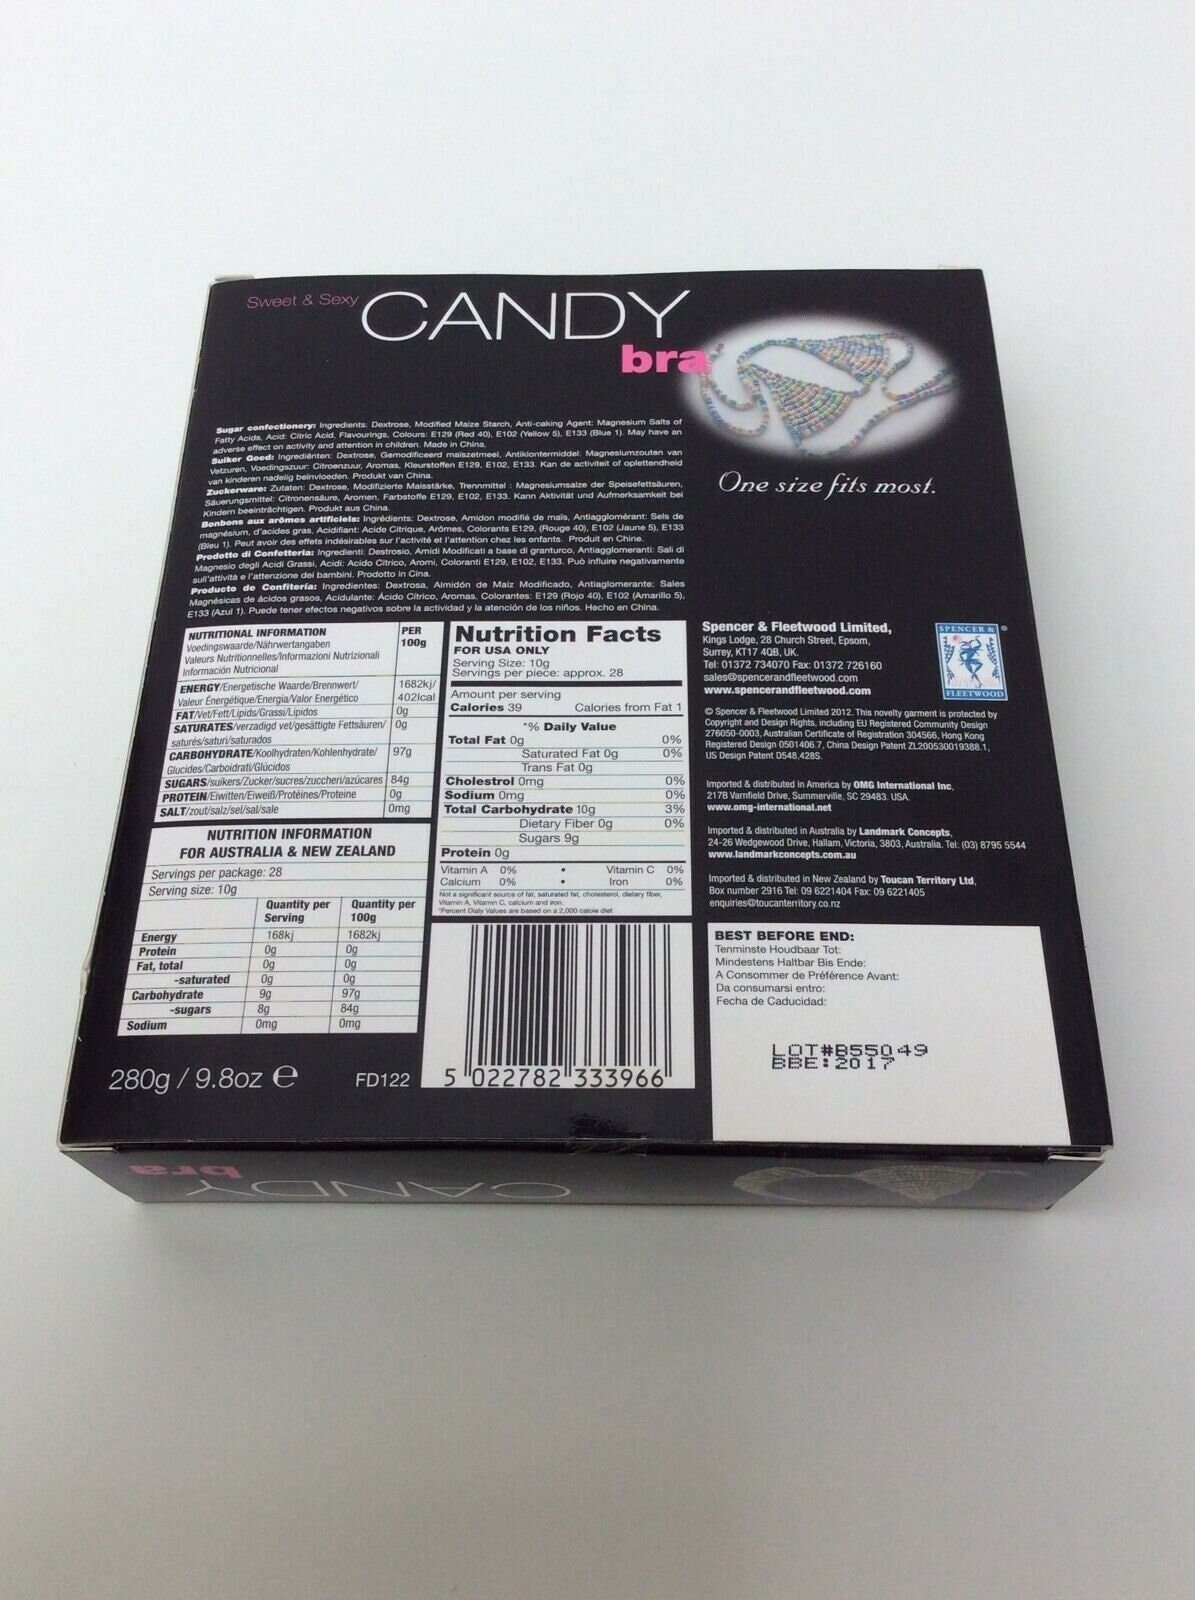 Candy Bra Sweet and Sexy Edible Underwear in Sealed Box UK SELLER